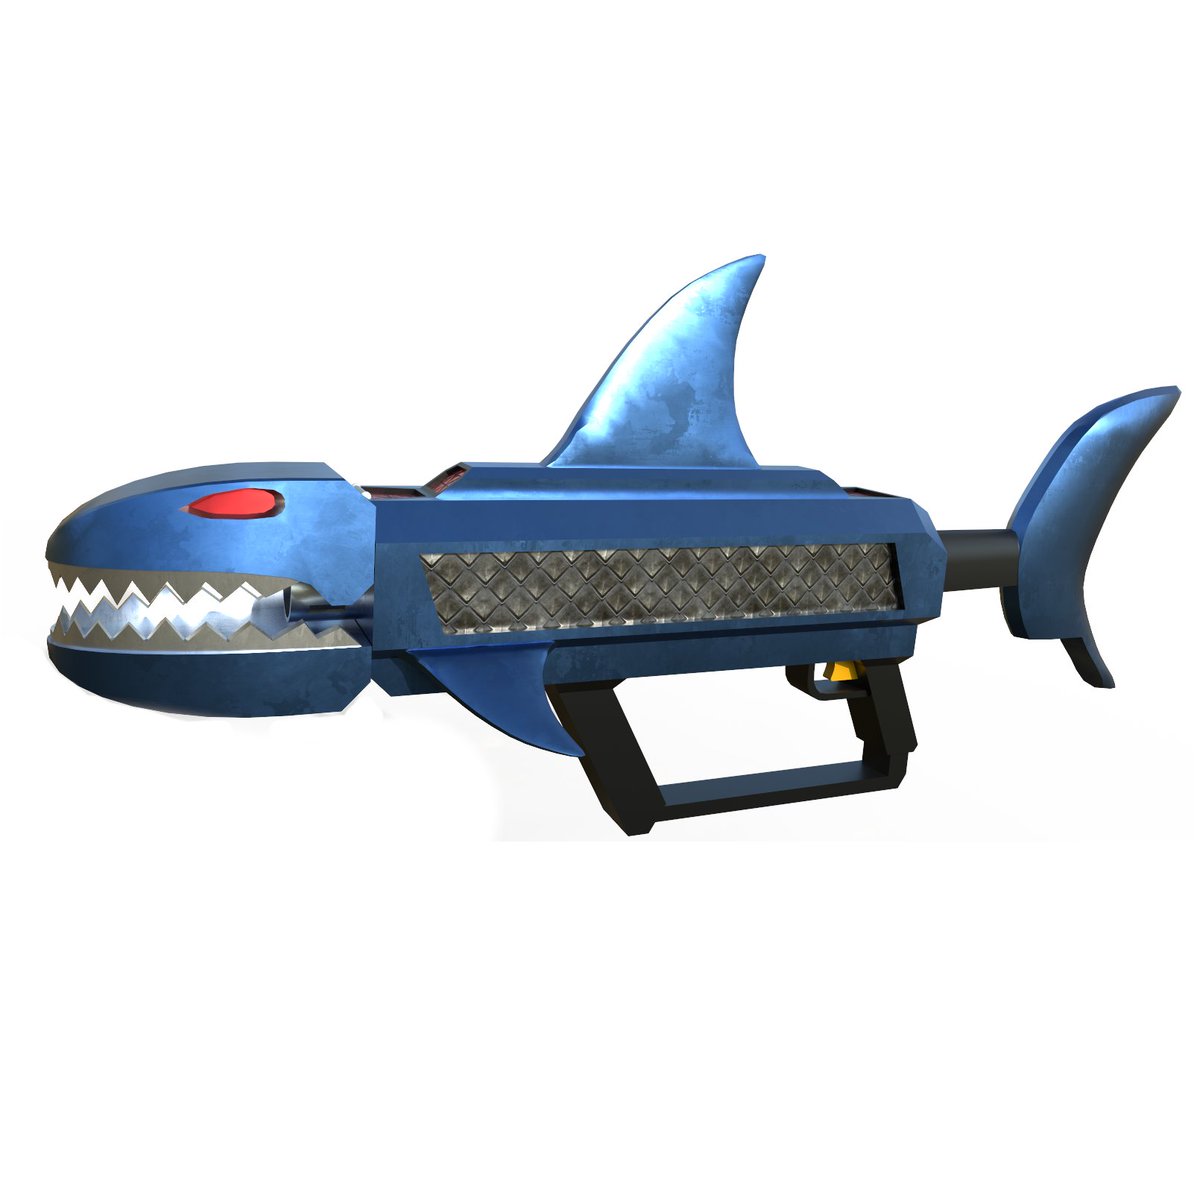 Simon On Twitter Here S A Render Of The Shark Blaster Featured In This Weeks Sharkbite Update The Jaws Open And Close When Fired In Game Https T Co Wha6z4ysht - codes for roblox sharkbite 2020 august